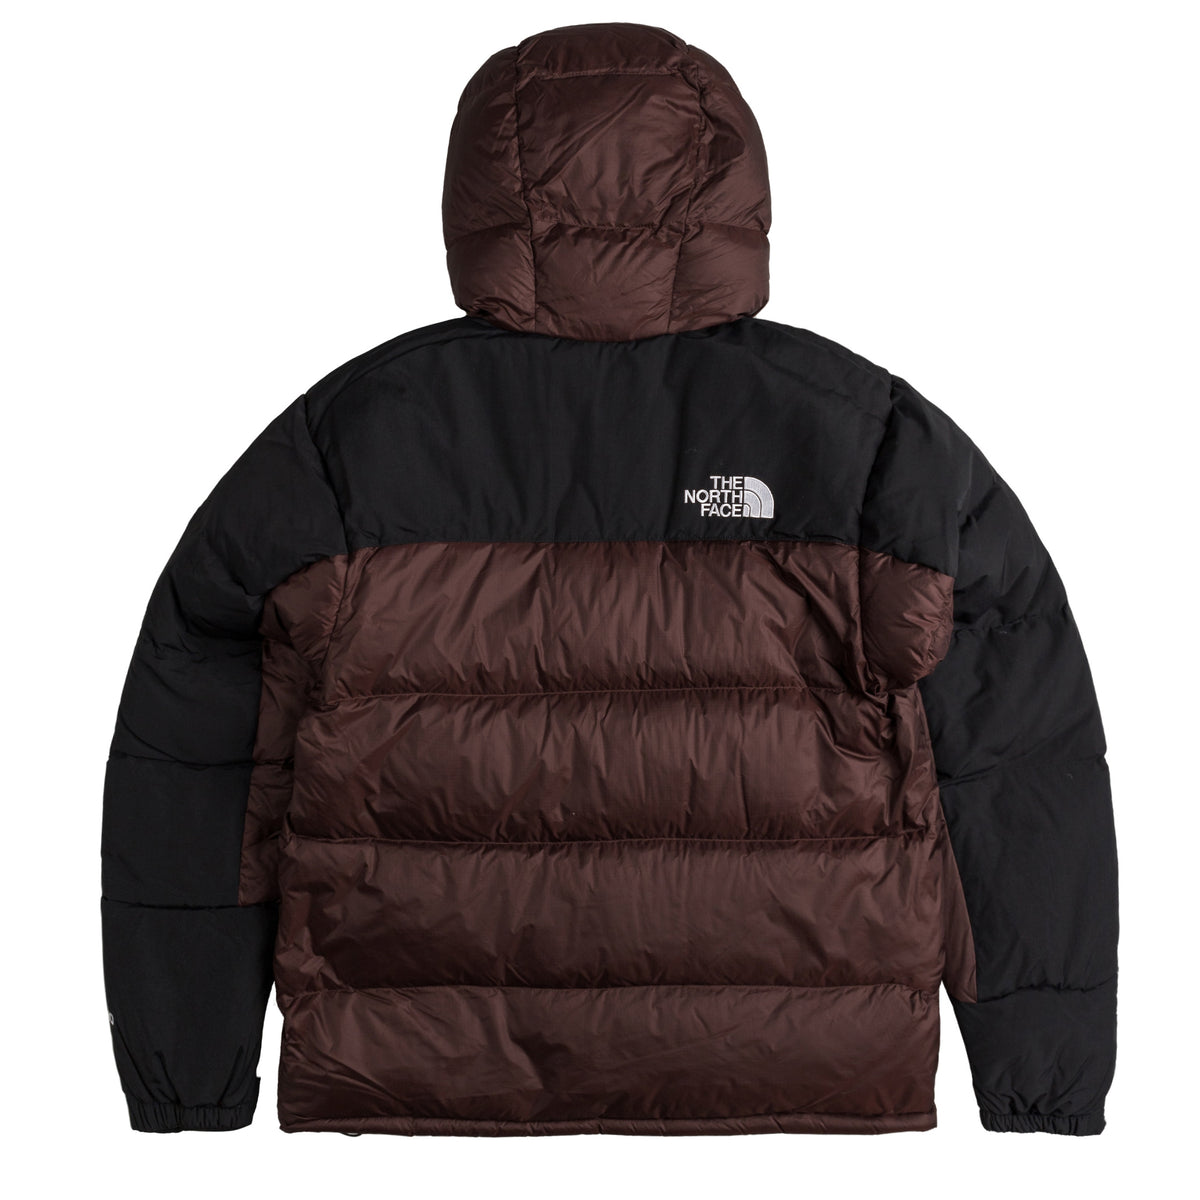 The North Face Himalayan Down Parka » Buy online now!